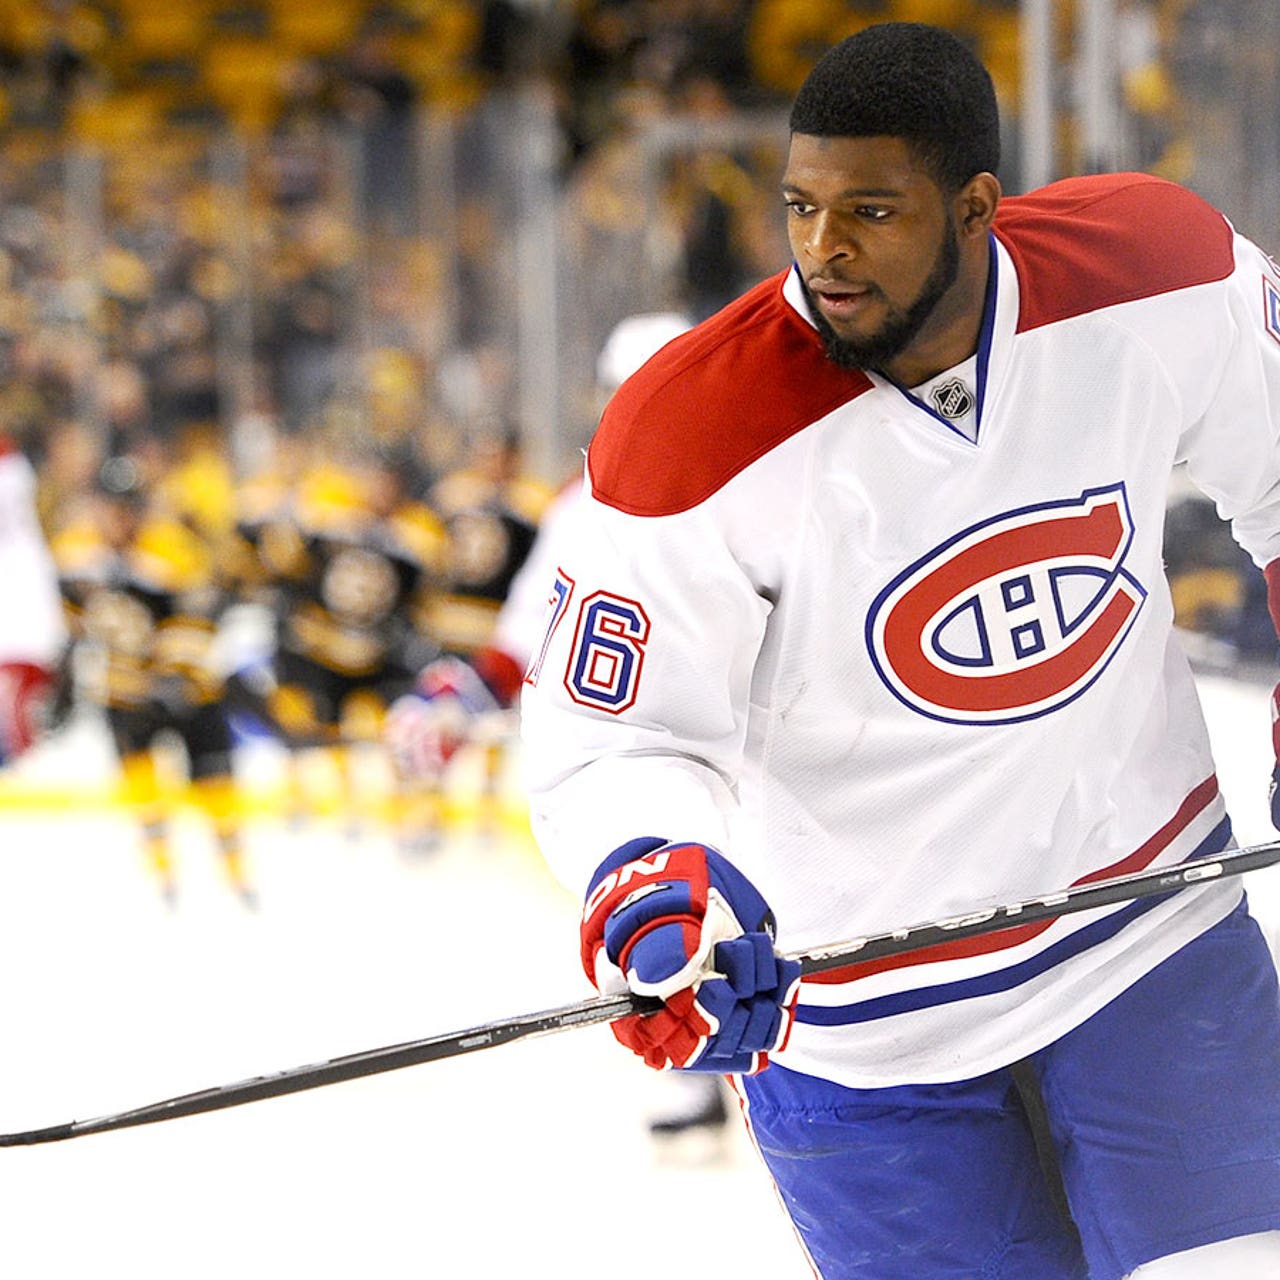 Canadiens vs. Hurricanes: P.K. Subban's outfit is awesome